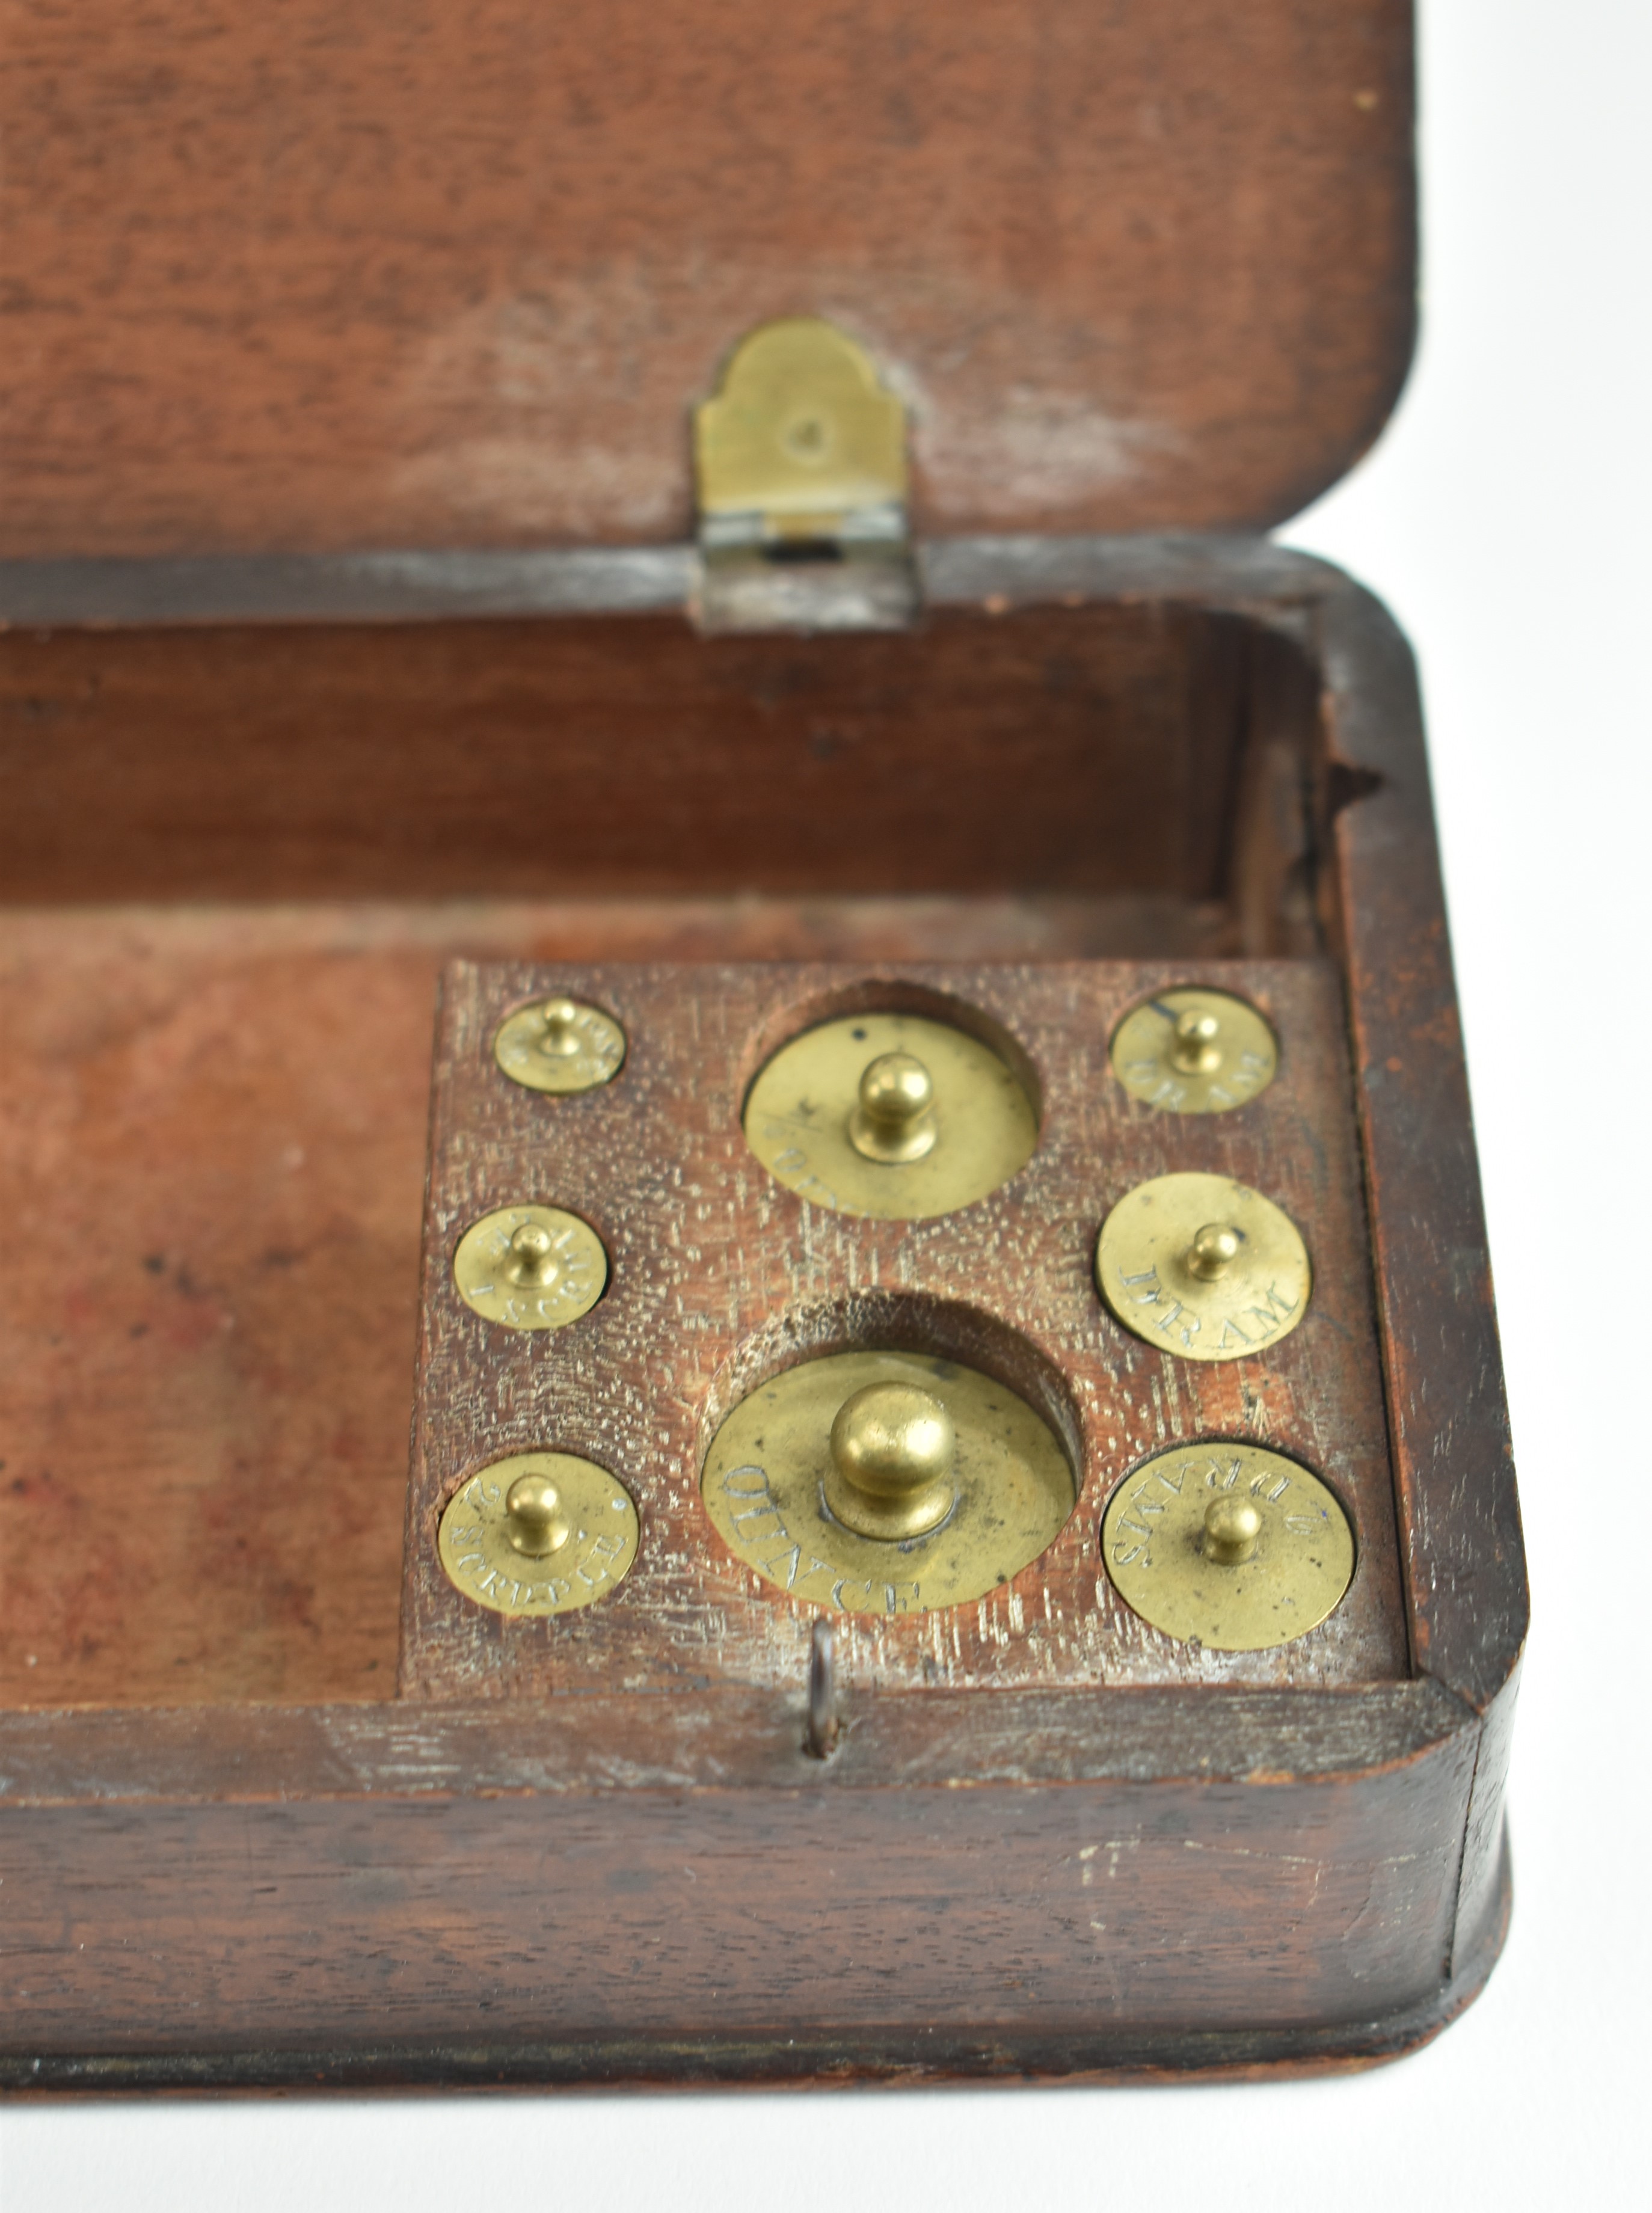 19TH CENTURY CASED SET OF MEDICINE SCALES & WIEGHTS BY J. W. HOLT - Image 8 of 14